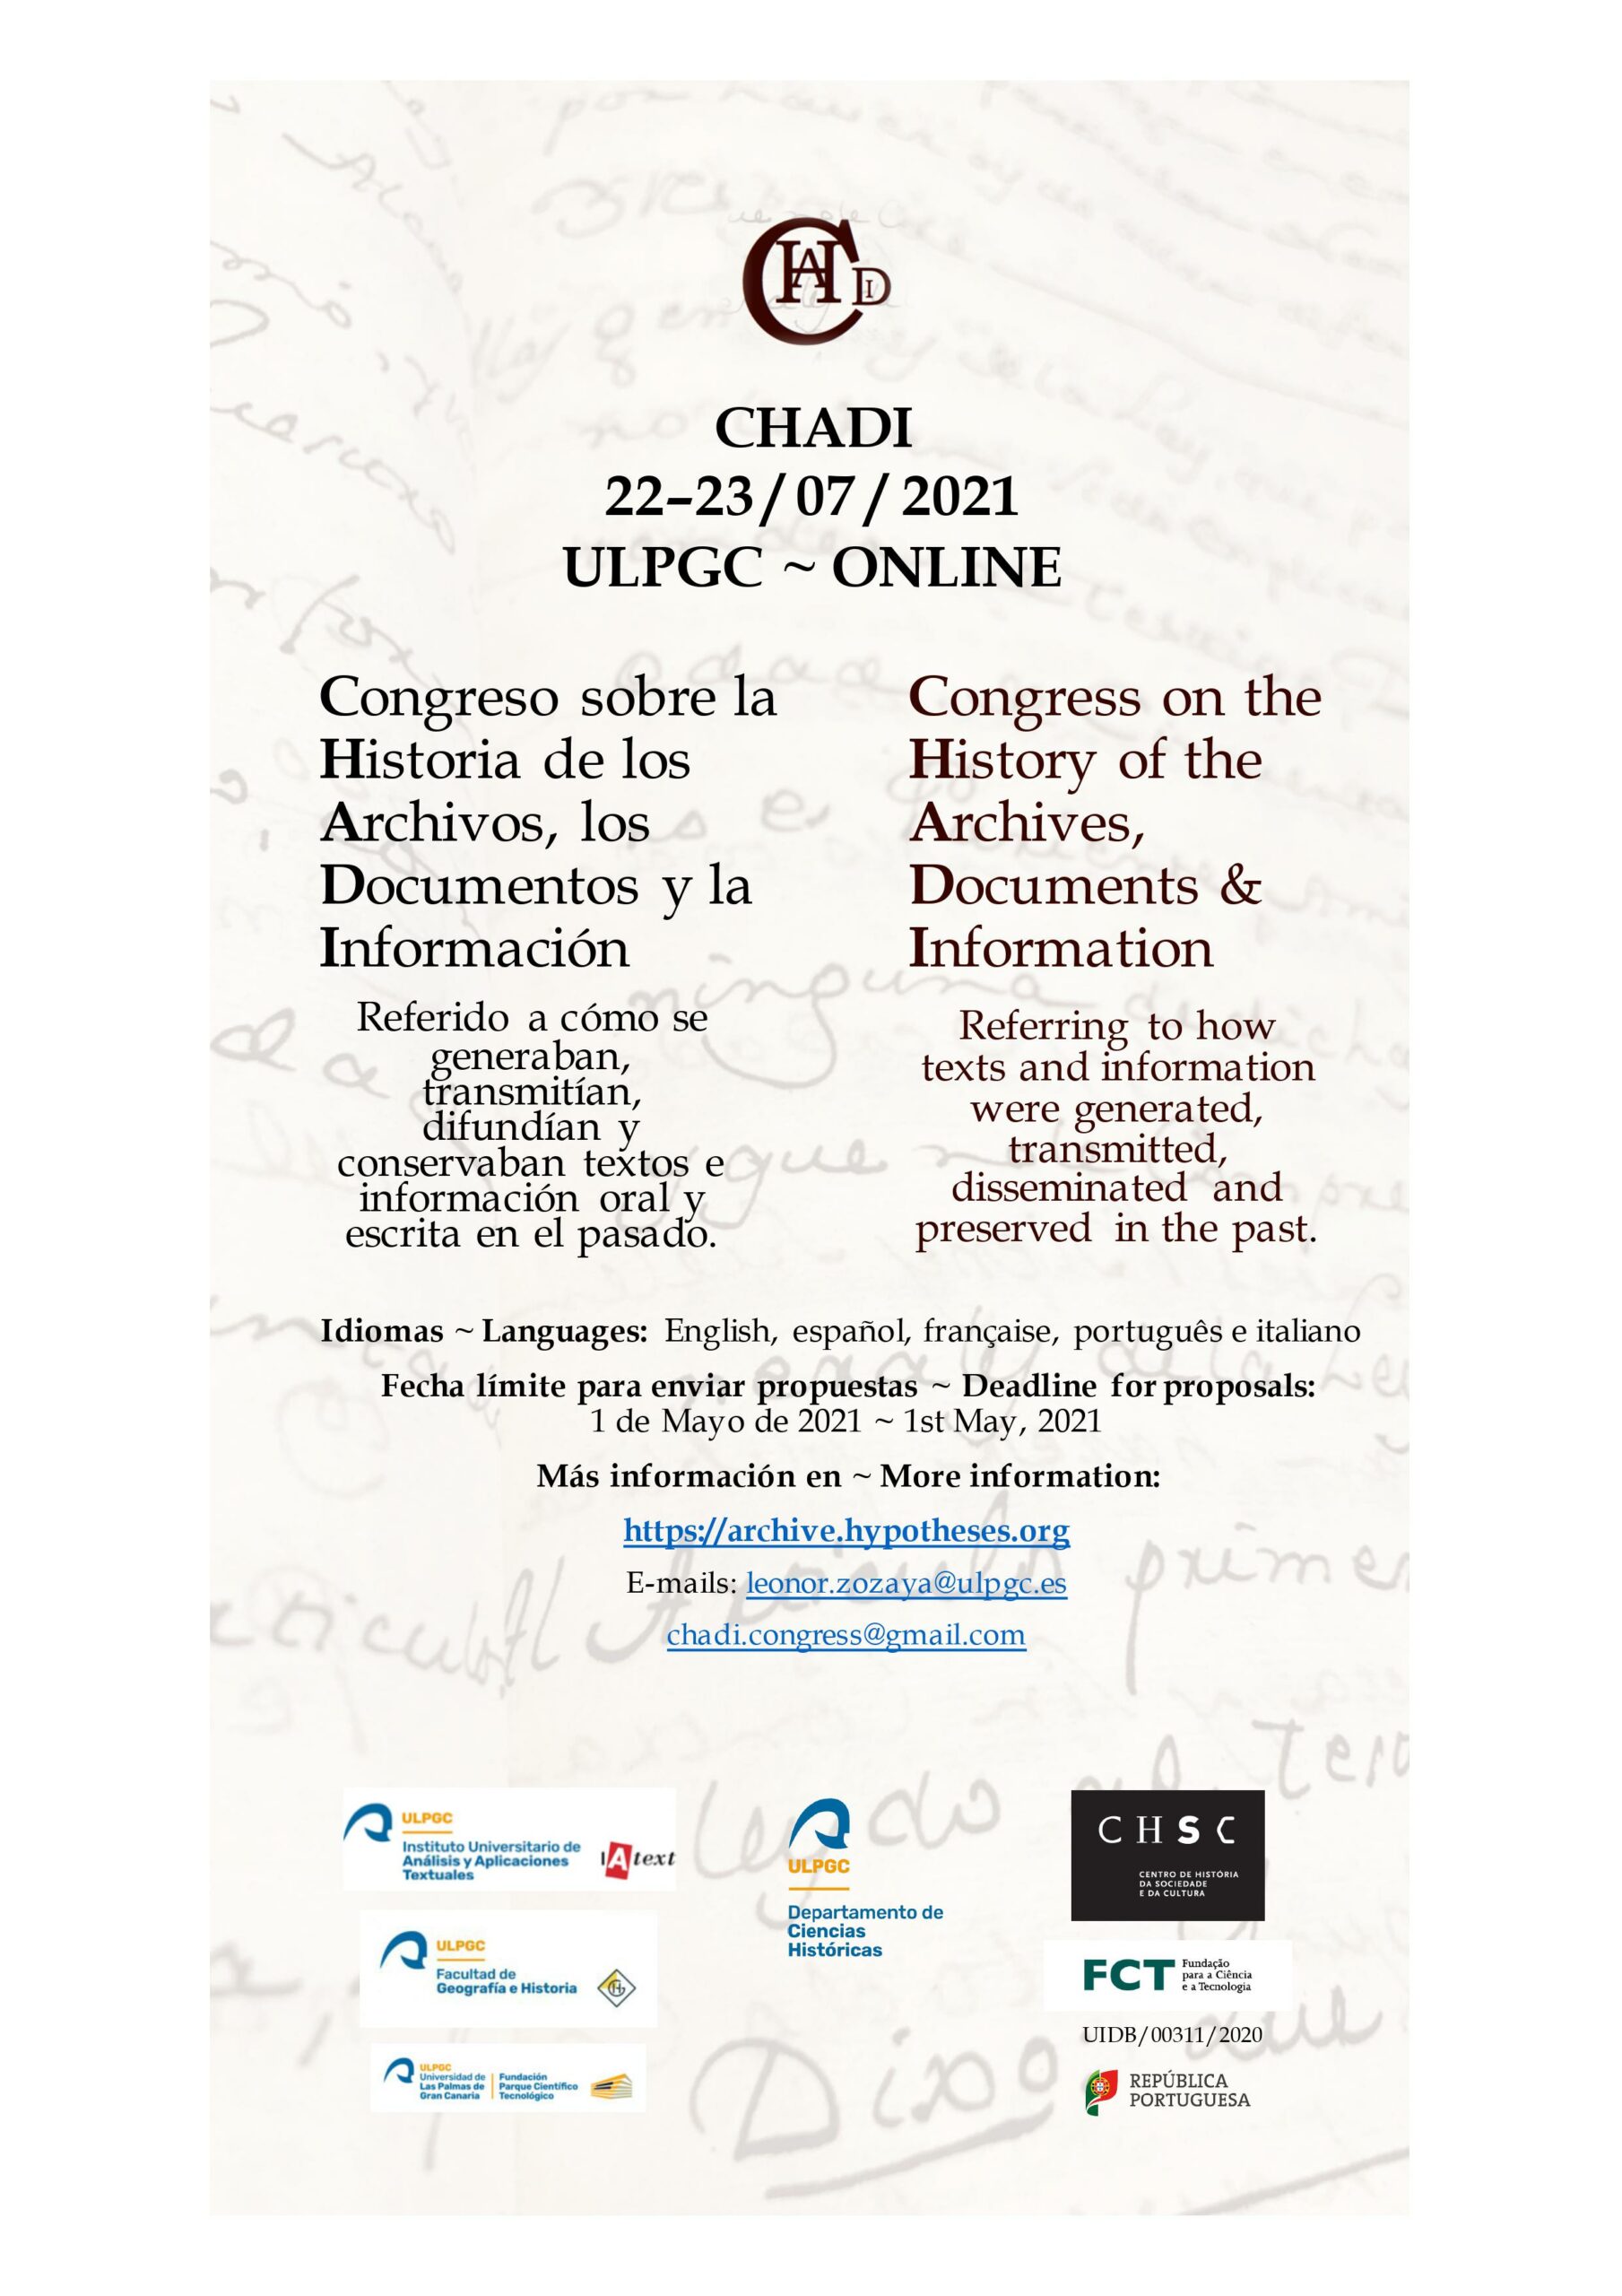 Congress on the History of the Archives, Documents & Information